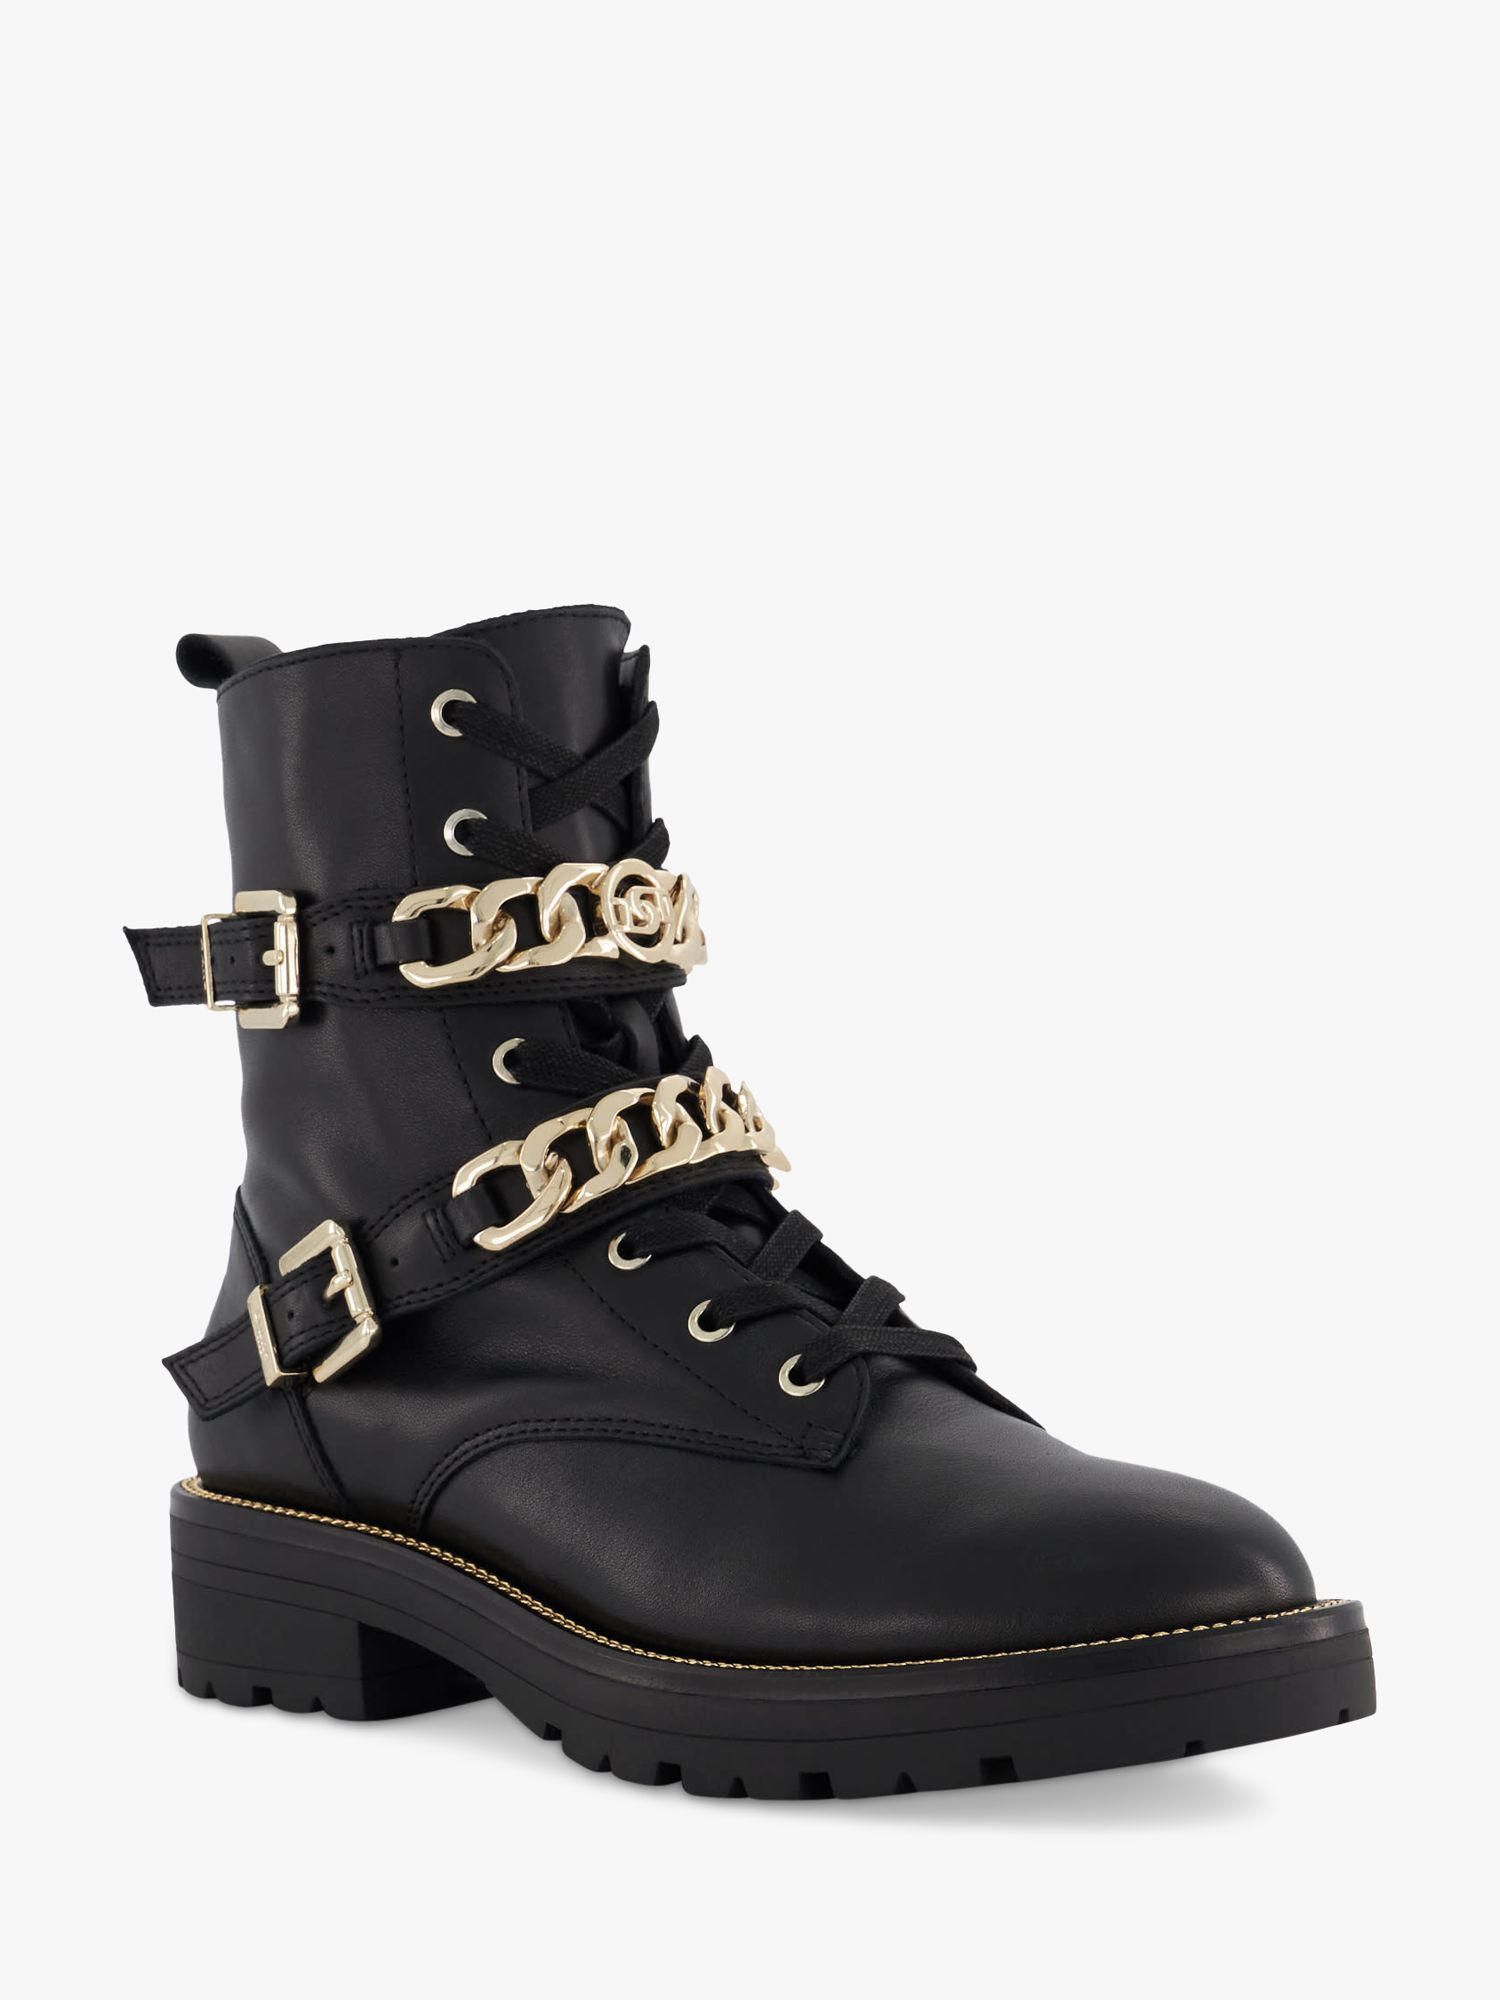 Dune Plazas Leather Ankle Boots, Black/Gold at John Lewis & Partners